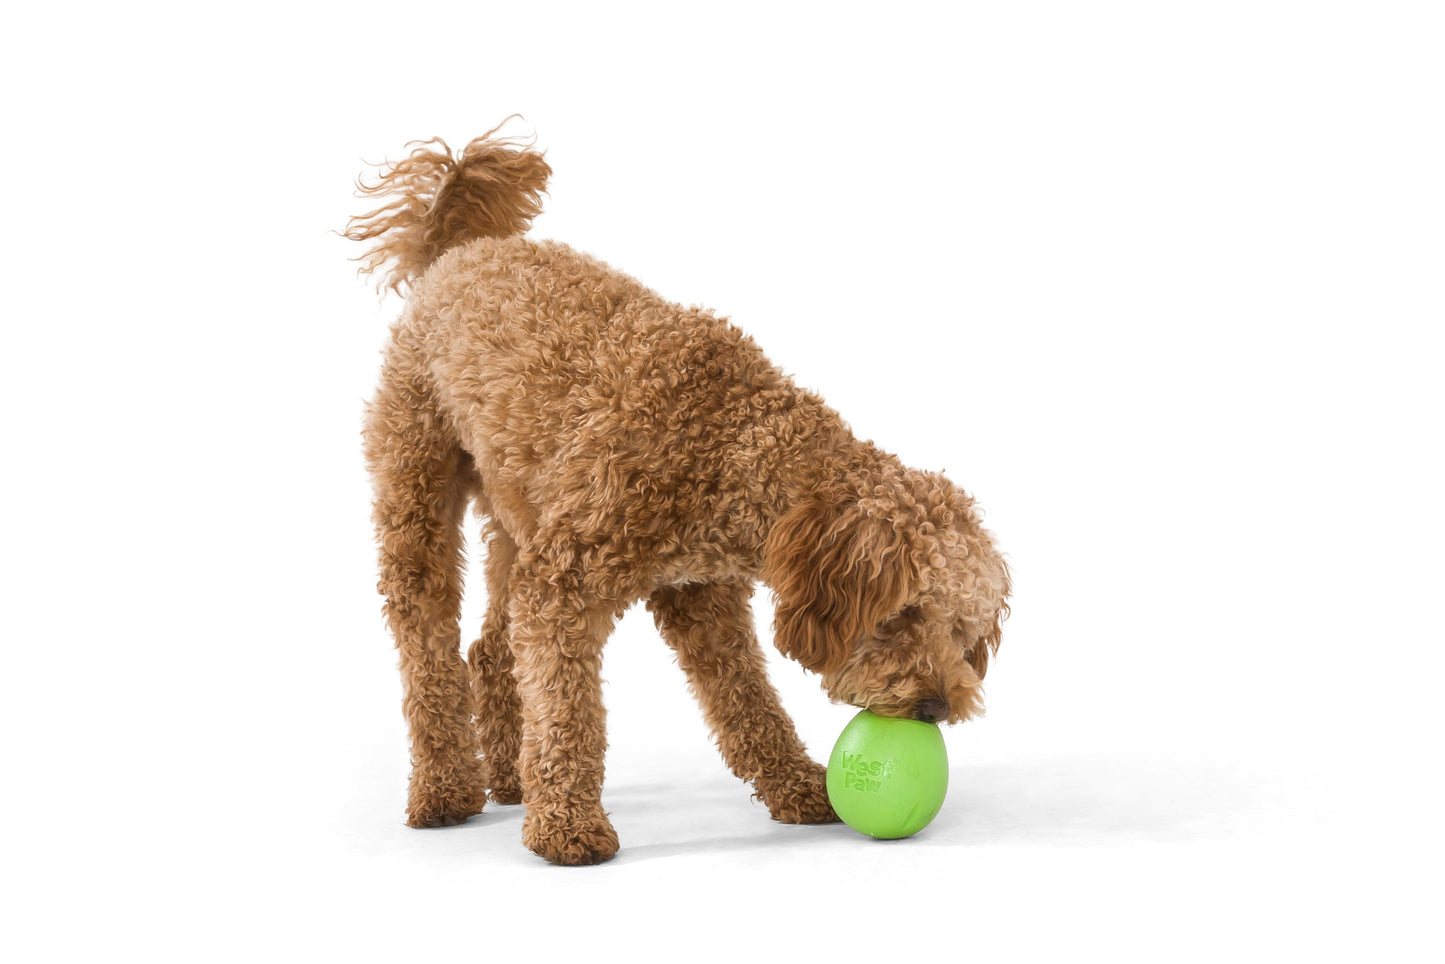 West Paw Rumbl Dog Toy - Jungle Green